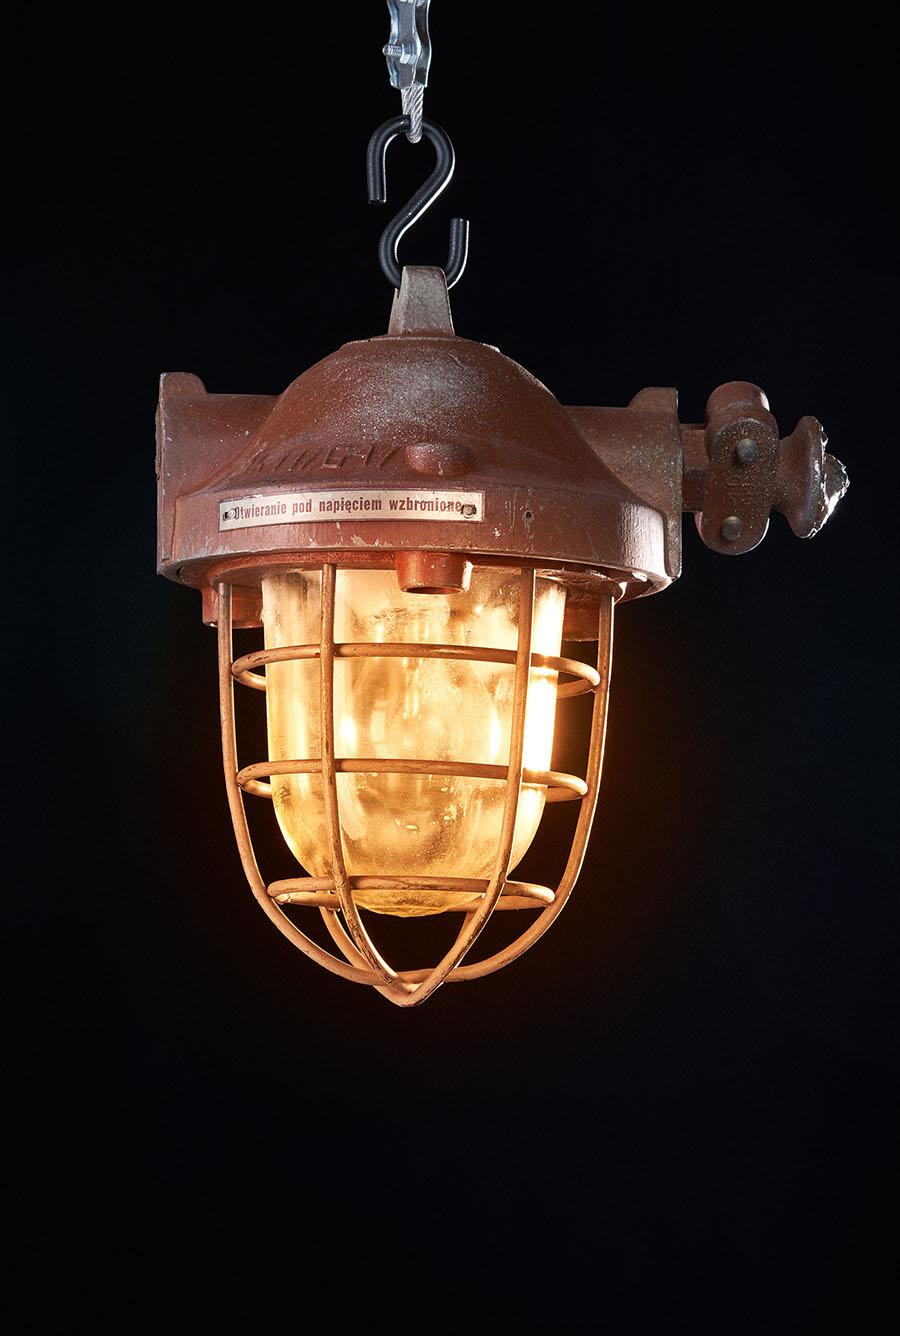 Primary Use
Mining explosion-proof luminaire for flameproof construction.
Explosion-proof luminaires were designed to illuminate gas decks of methane gas mines and other surfaces and rooms with a risk of explosion 